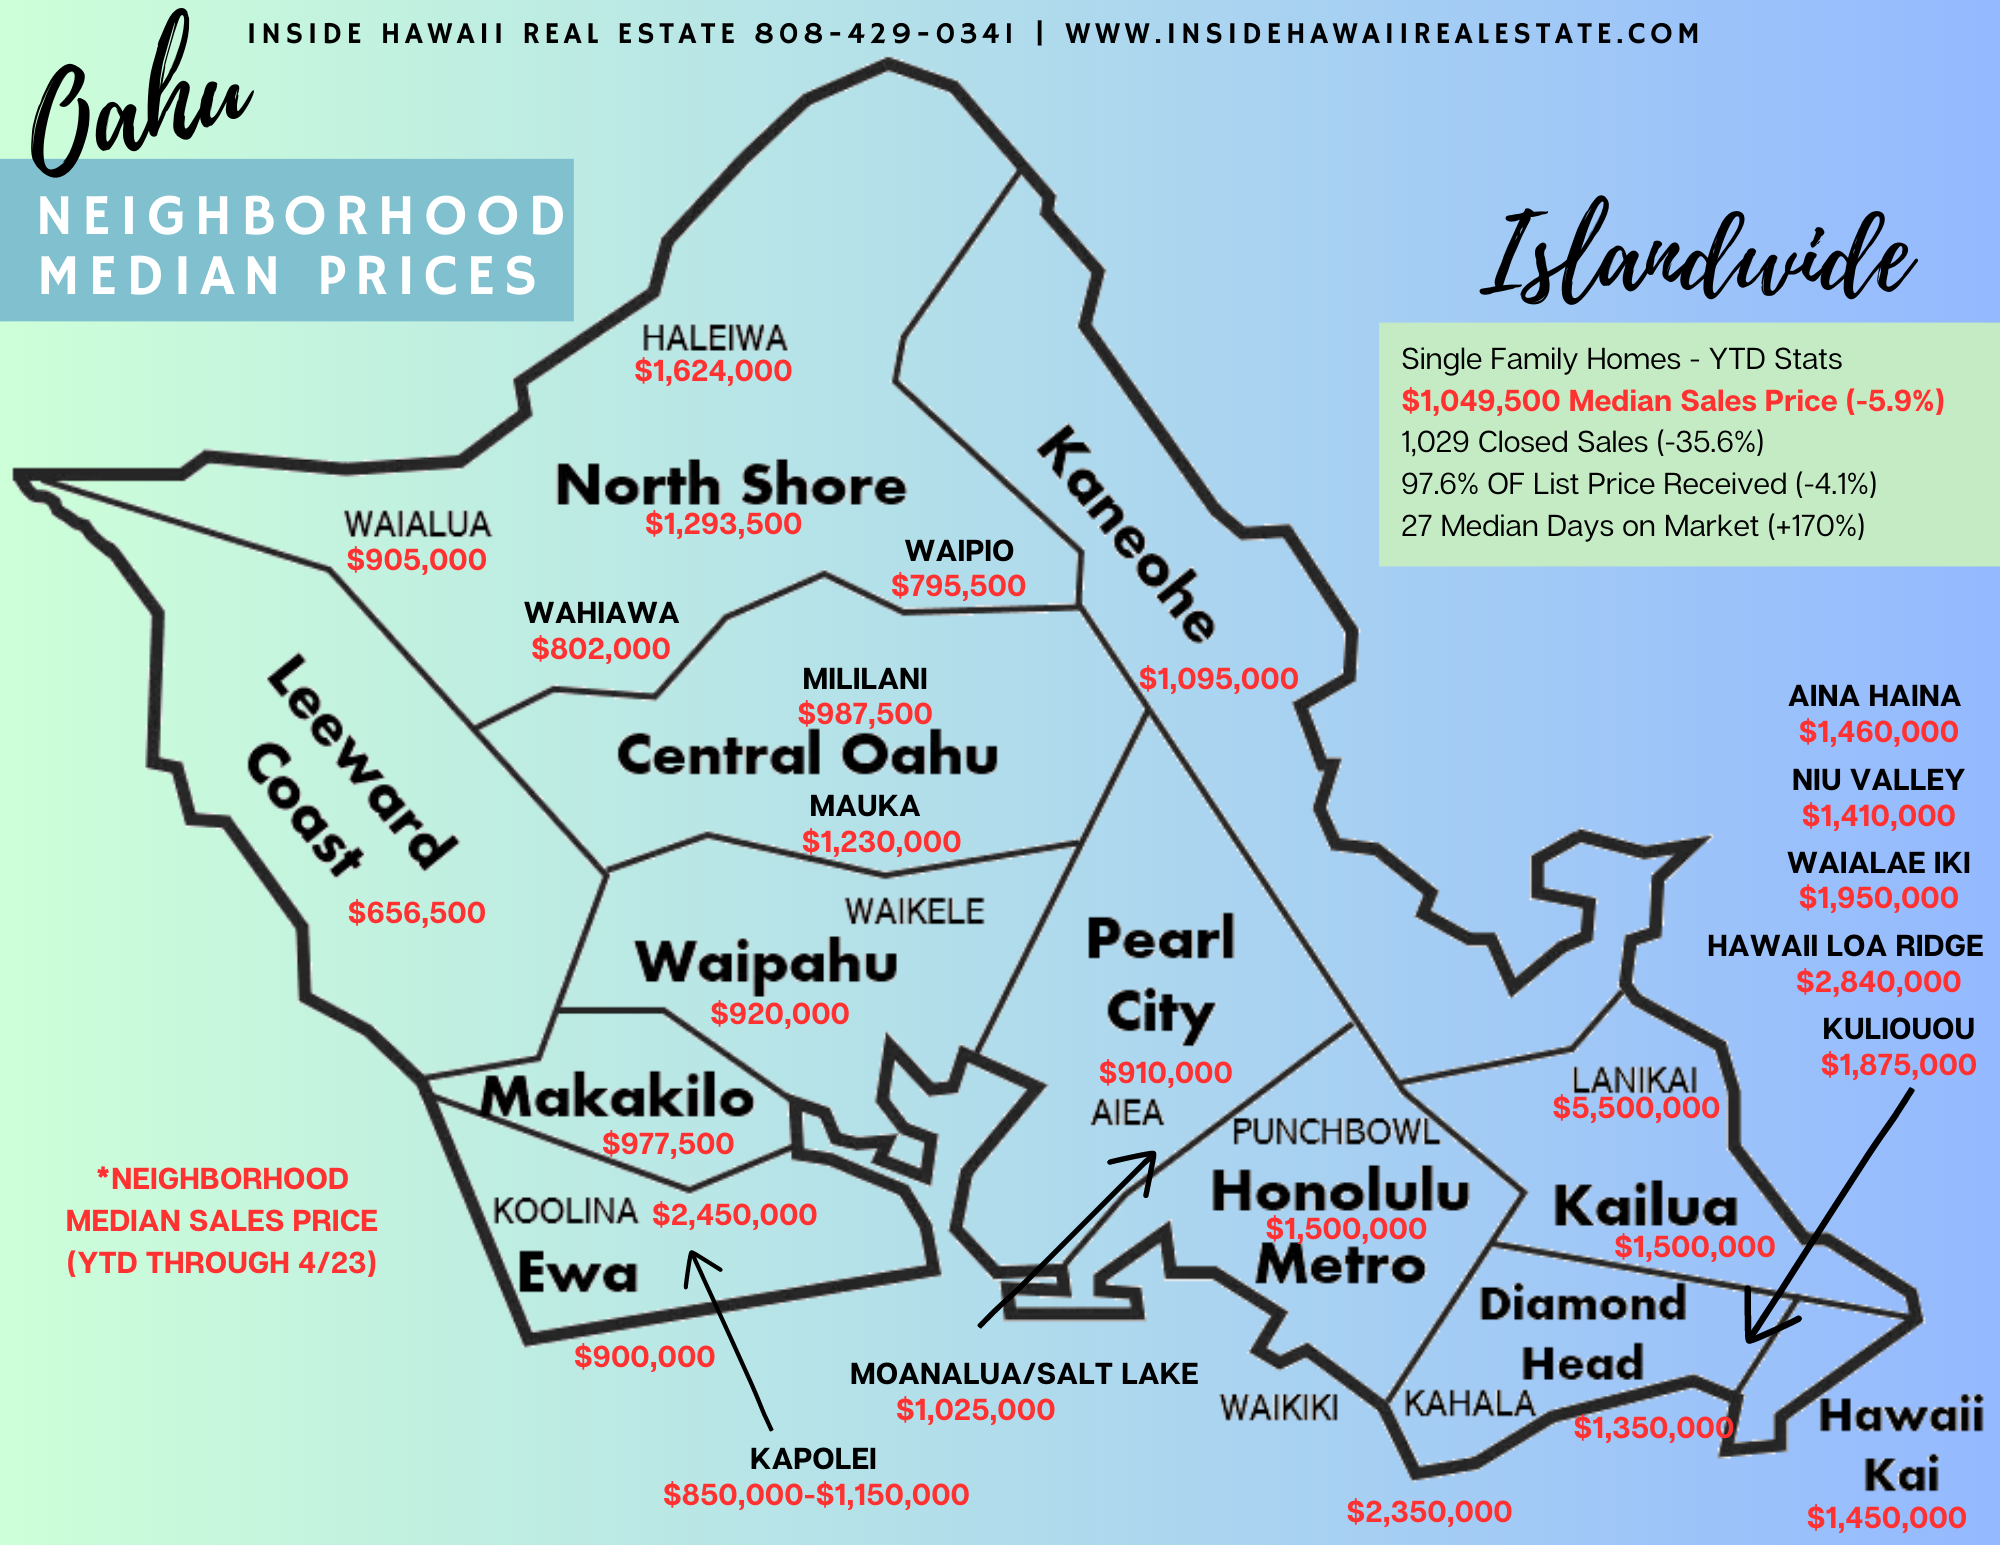 Oahu Map - Median Prices final